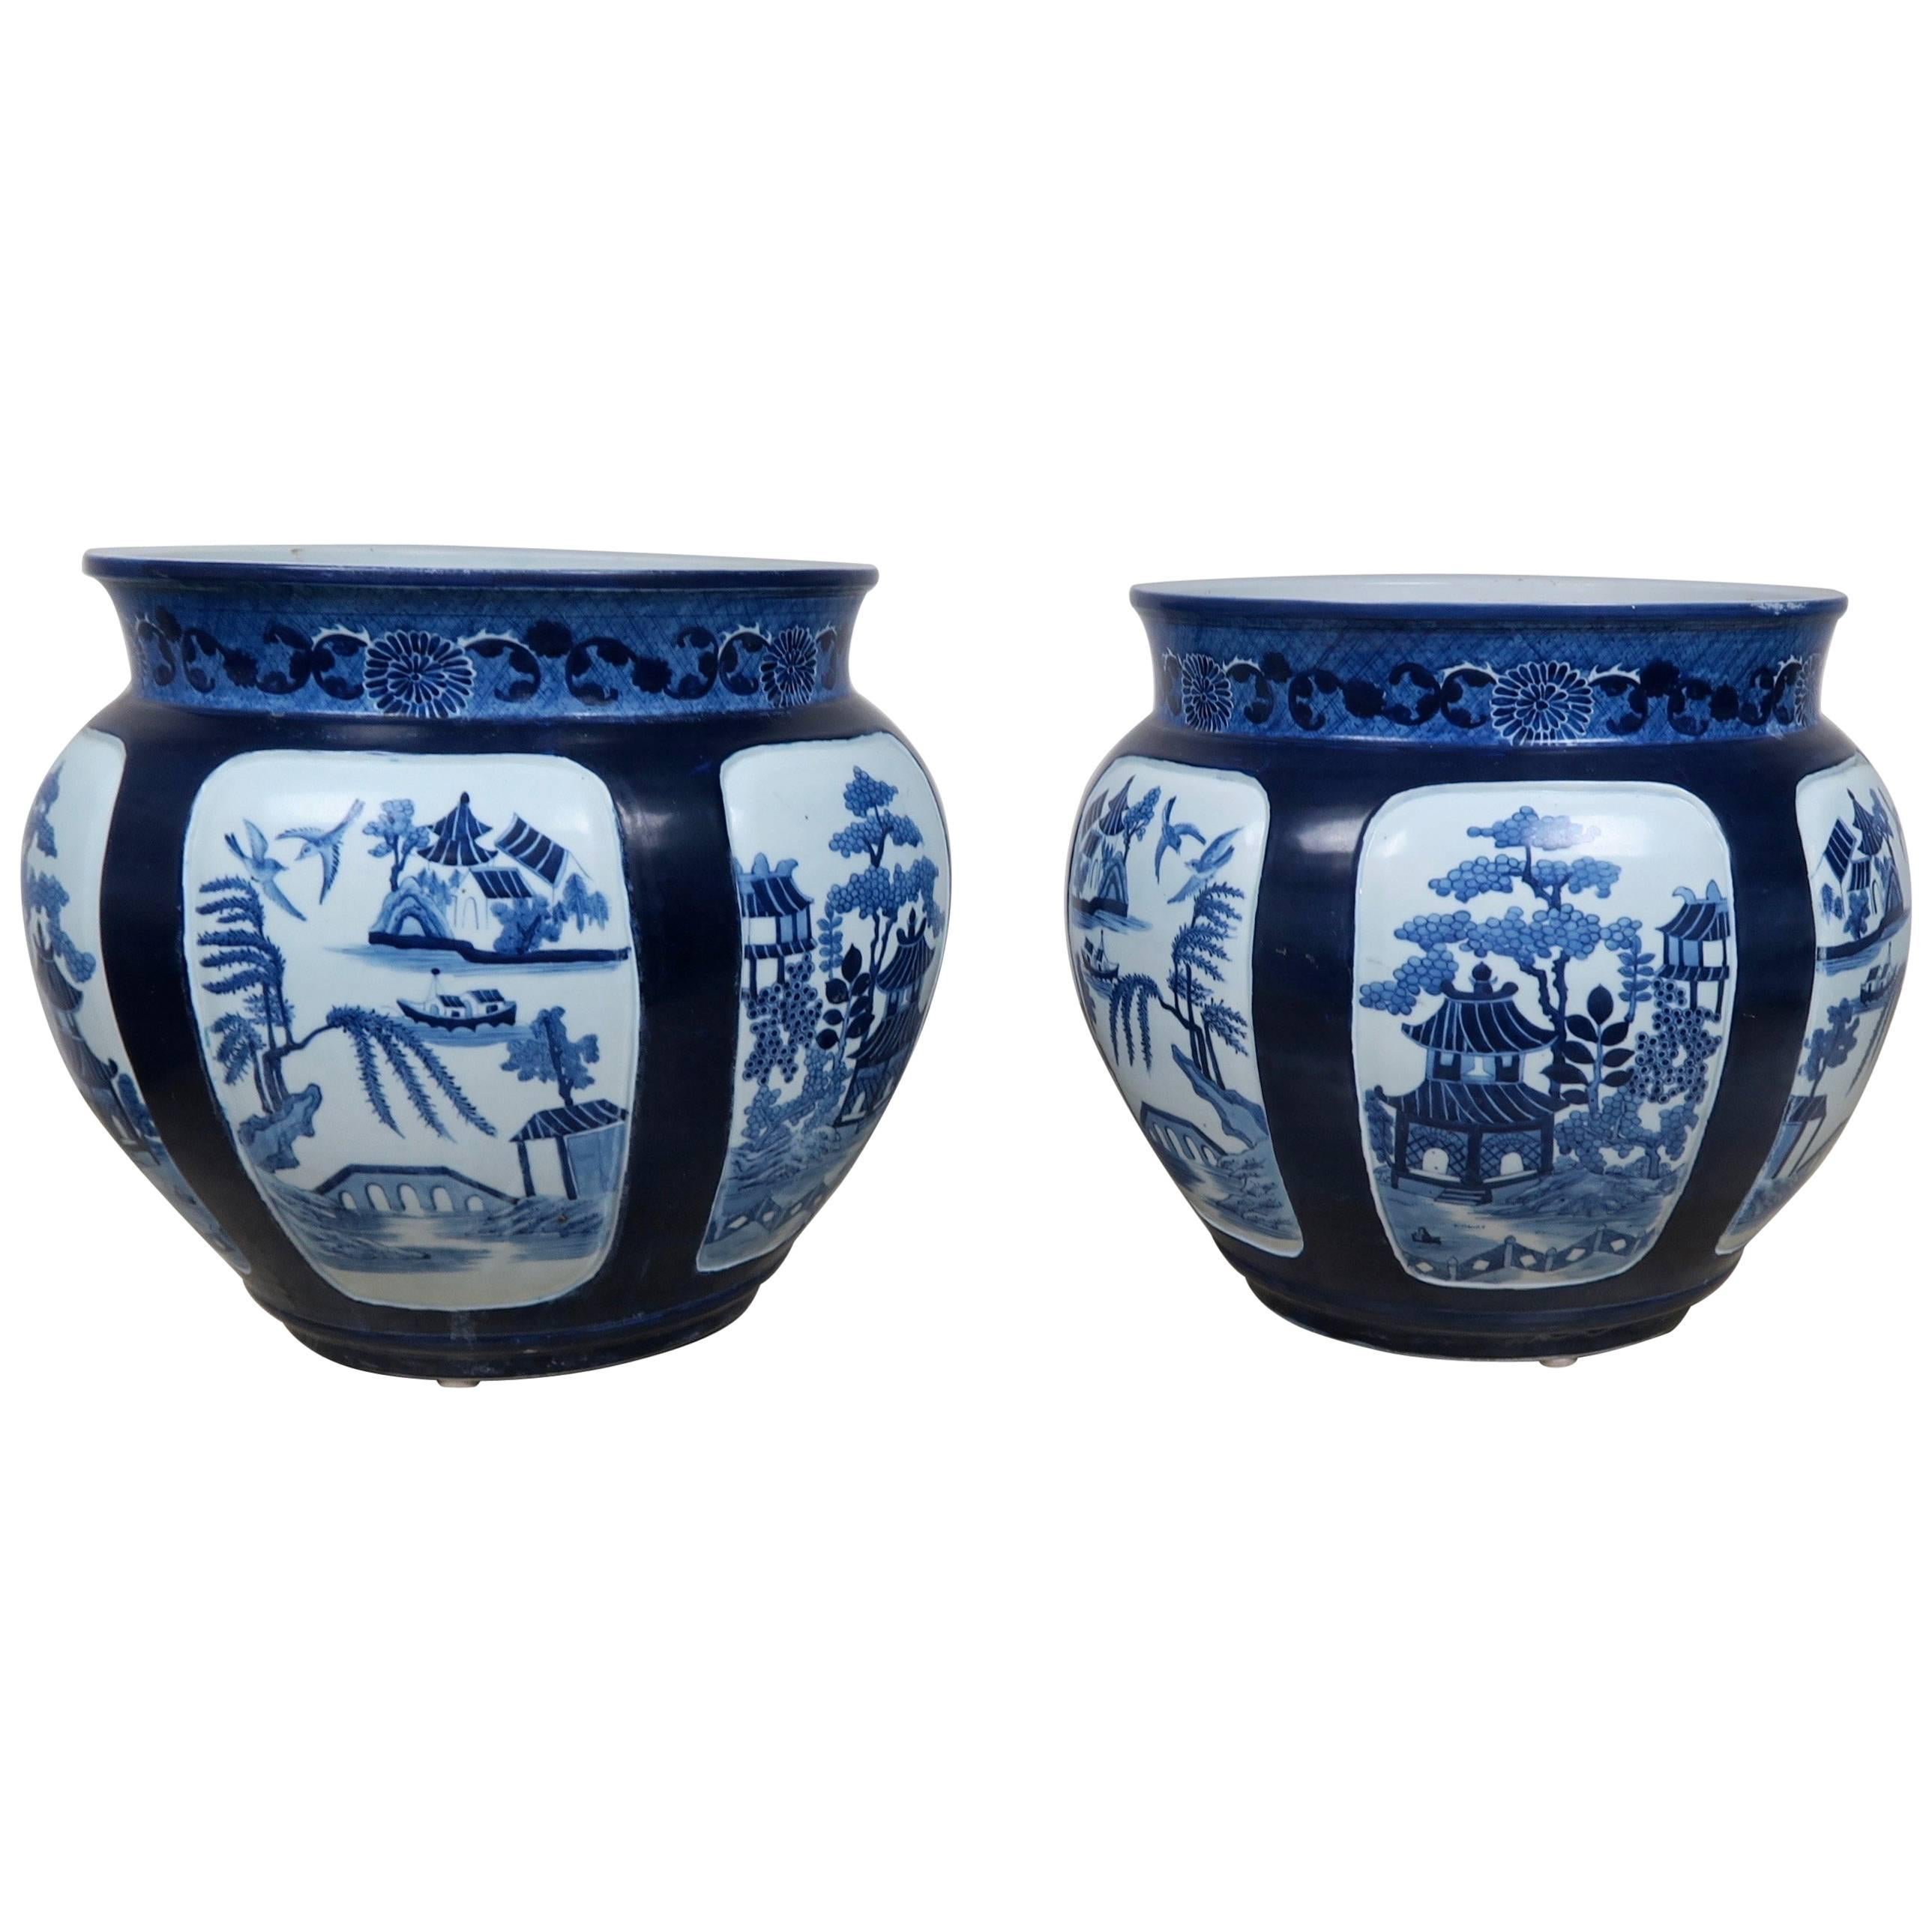 Pair of Blue and White Chinese Planters